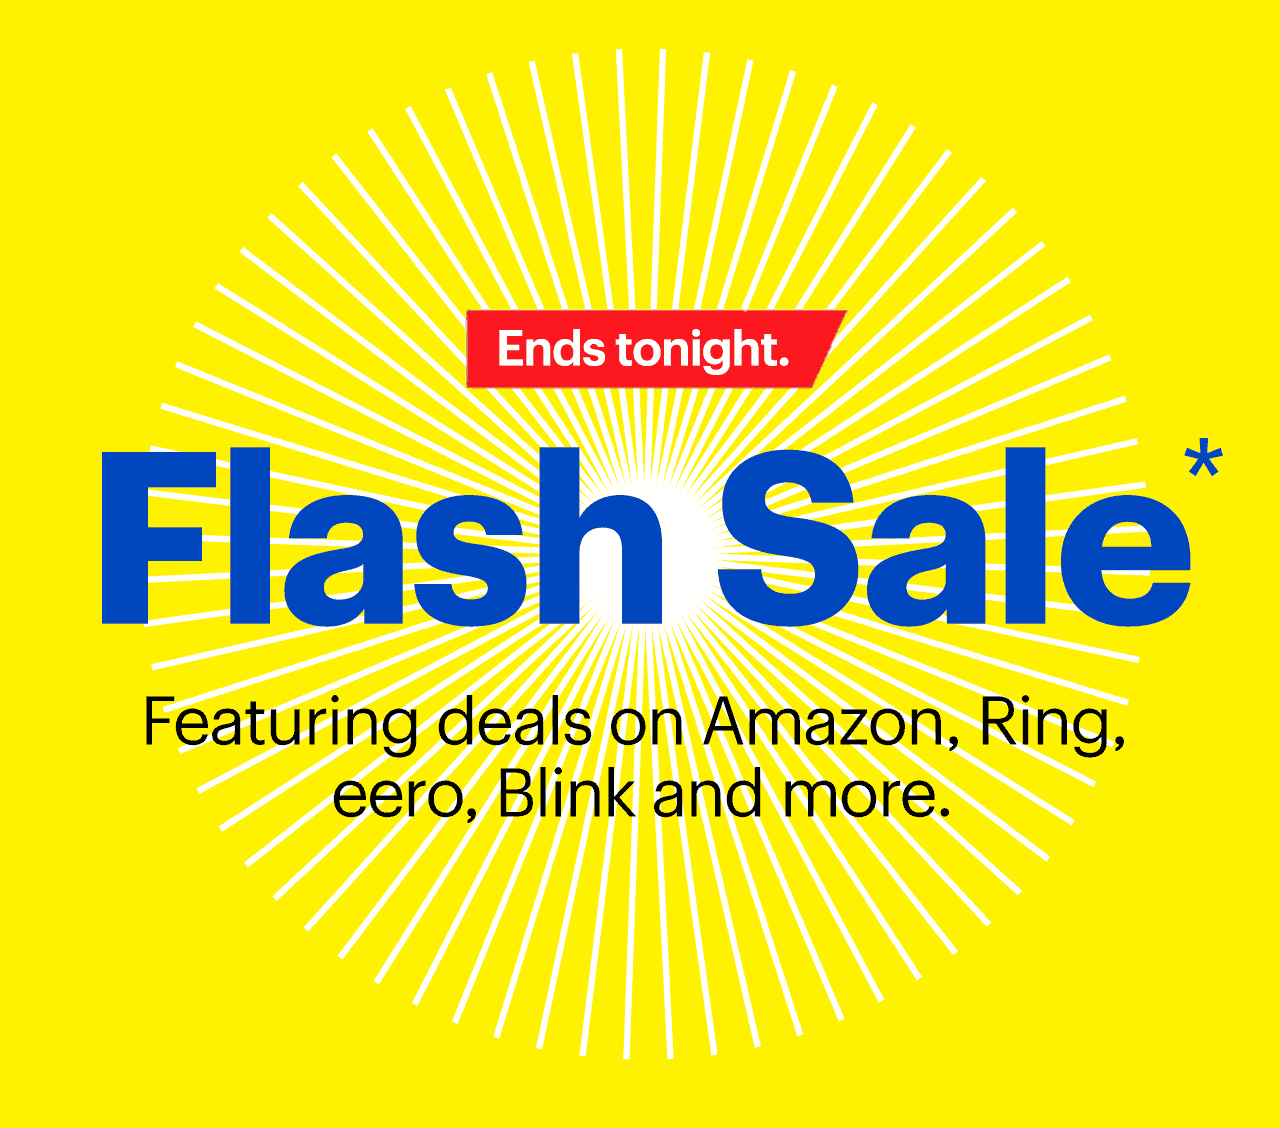 Flash Sale. Featuring deals on Amazon, Ring, eero, Blink and more. Ends tonight. Reference disclaimer.